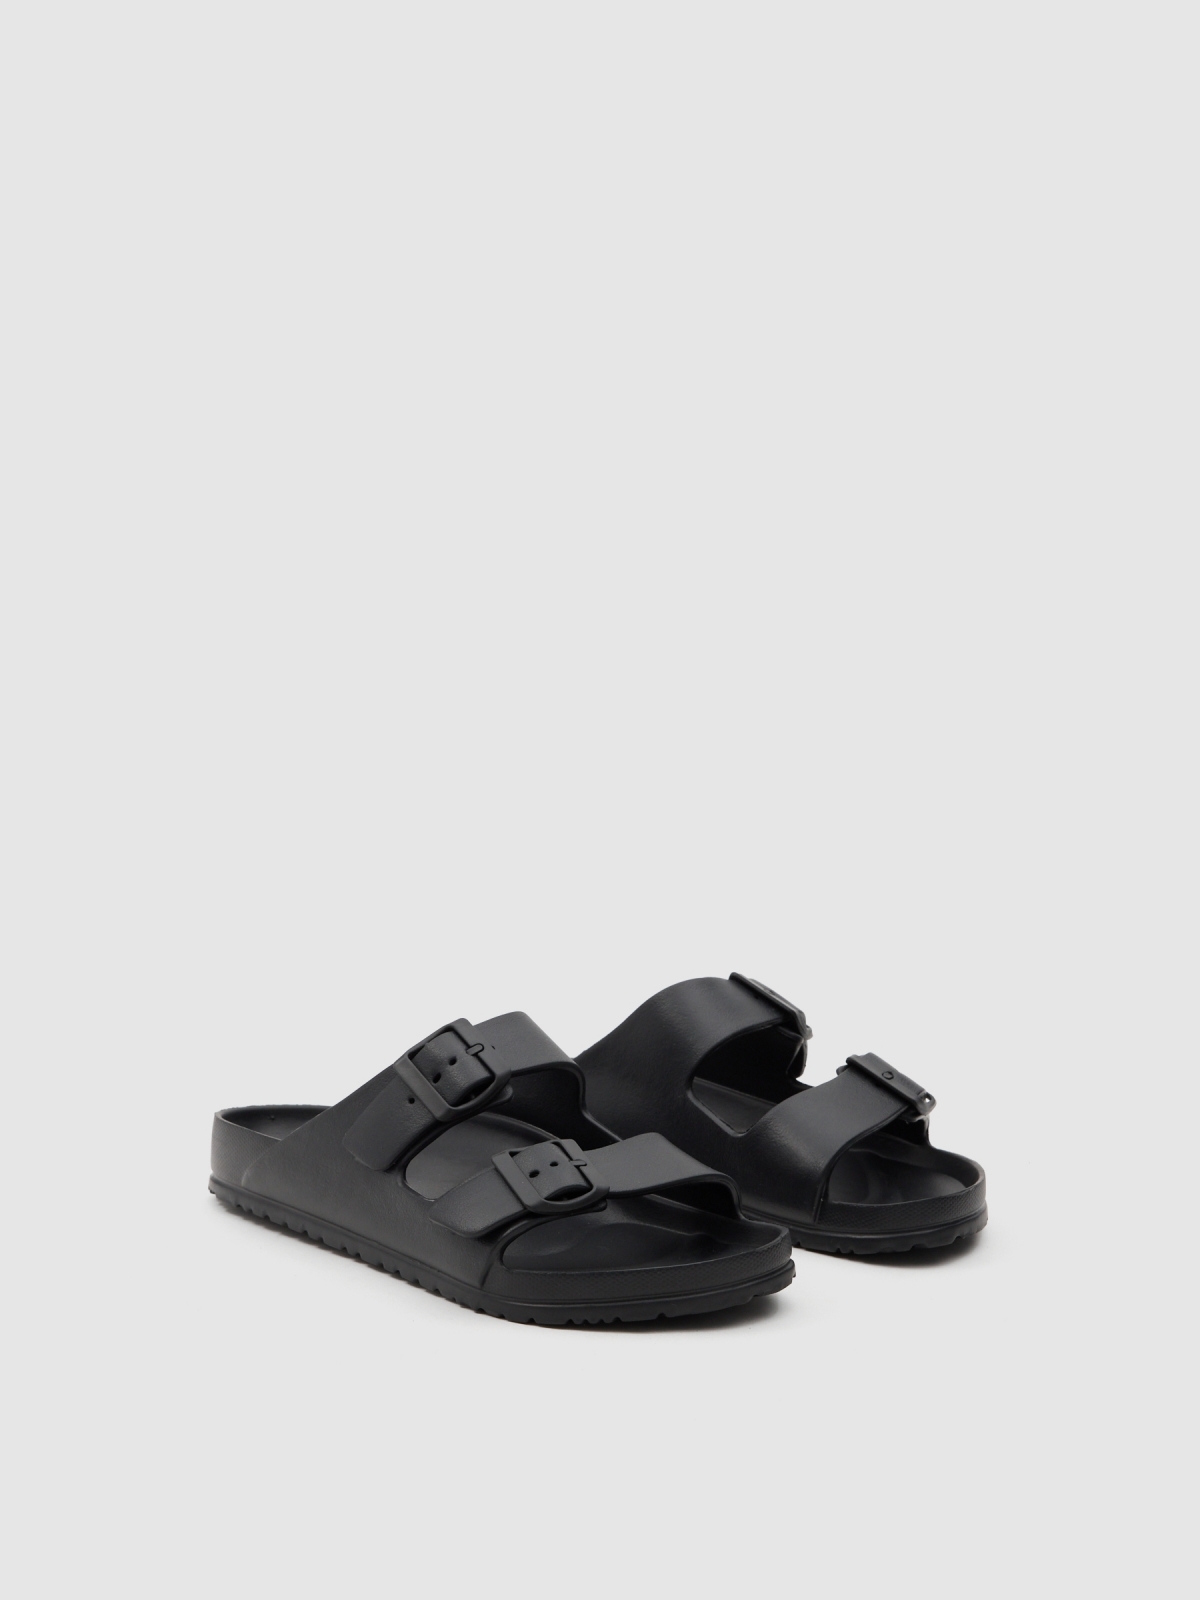 Double buckle flip flop black lateral view